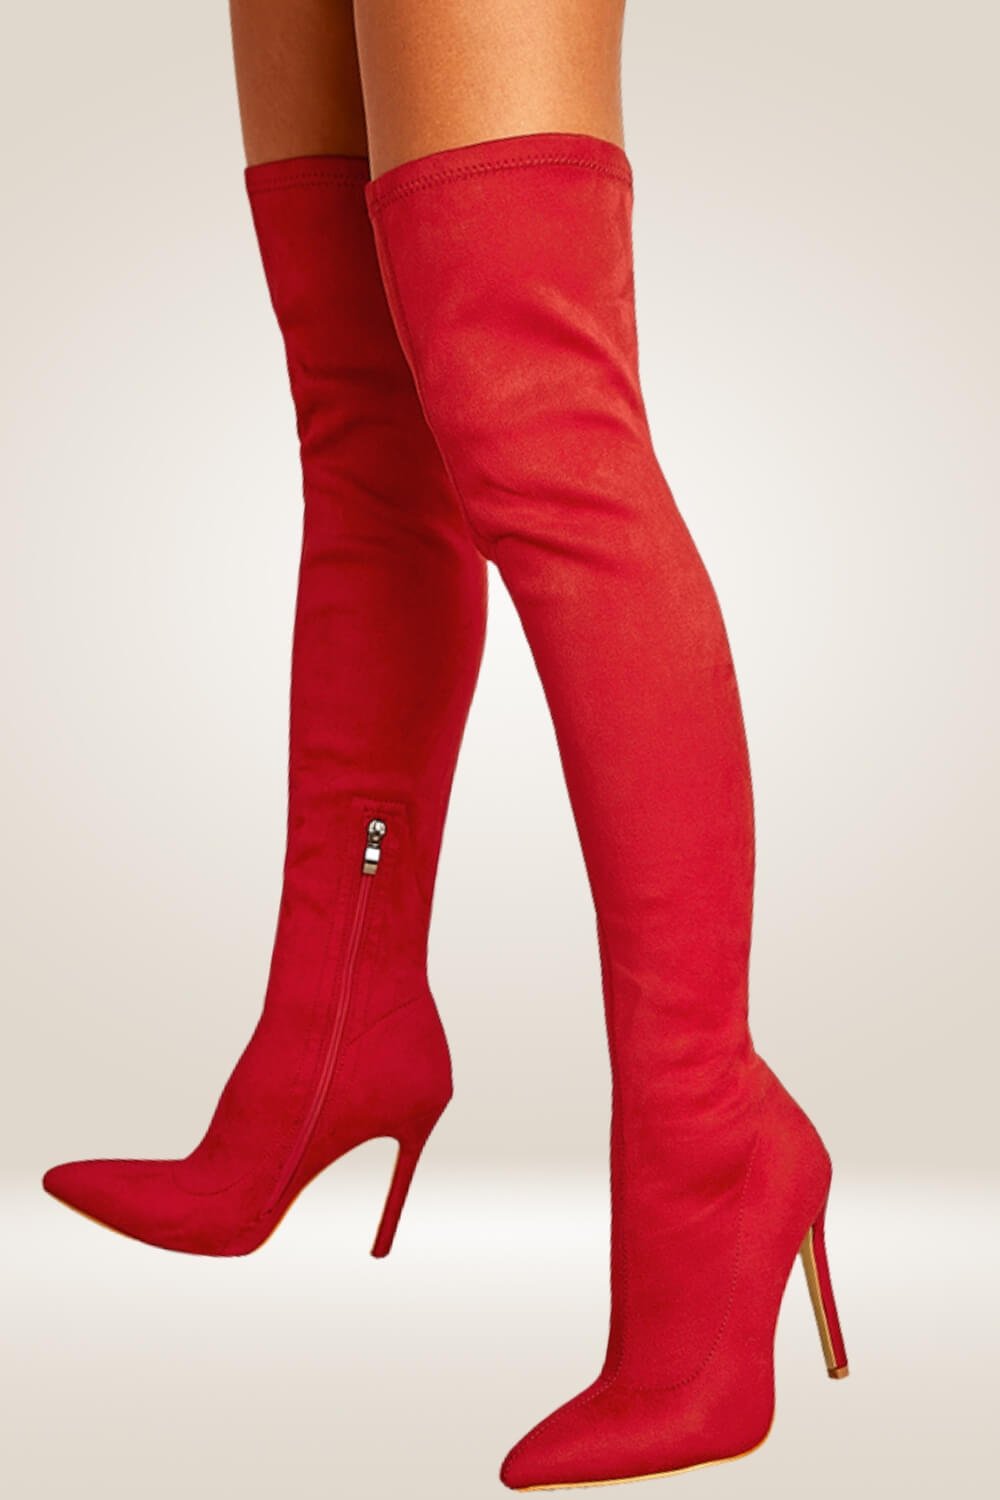 High Heel Red Over The Knee Boots - TGC Boutique - Boots